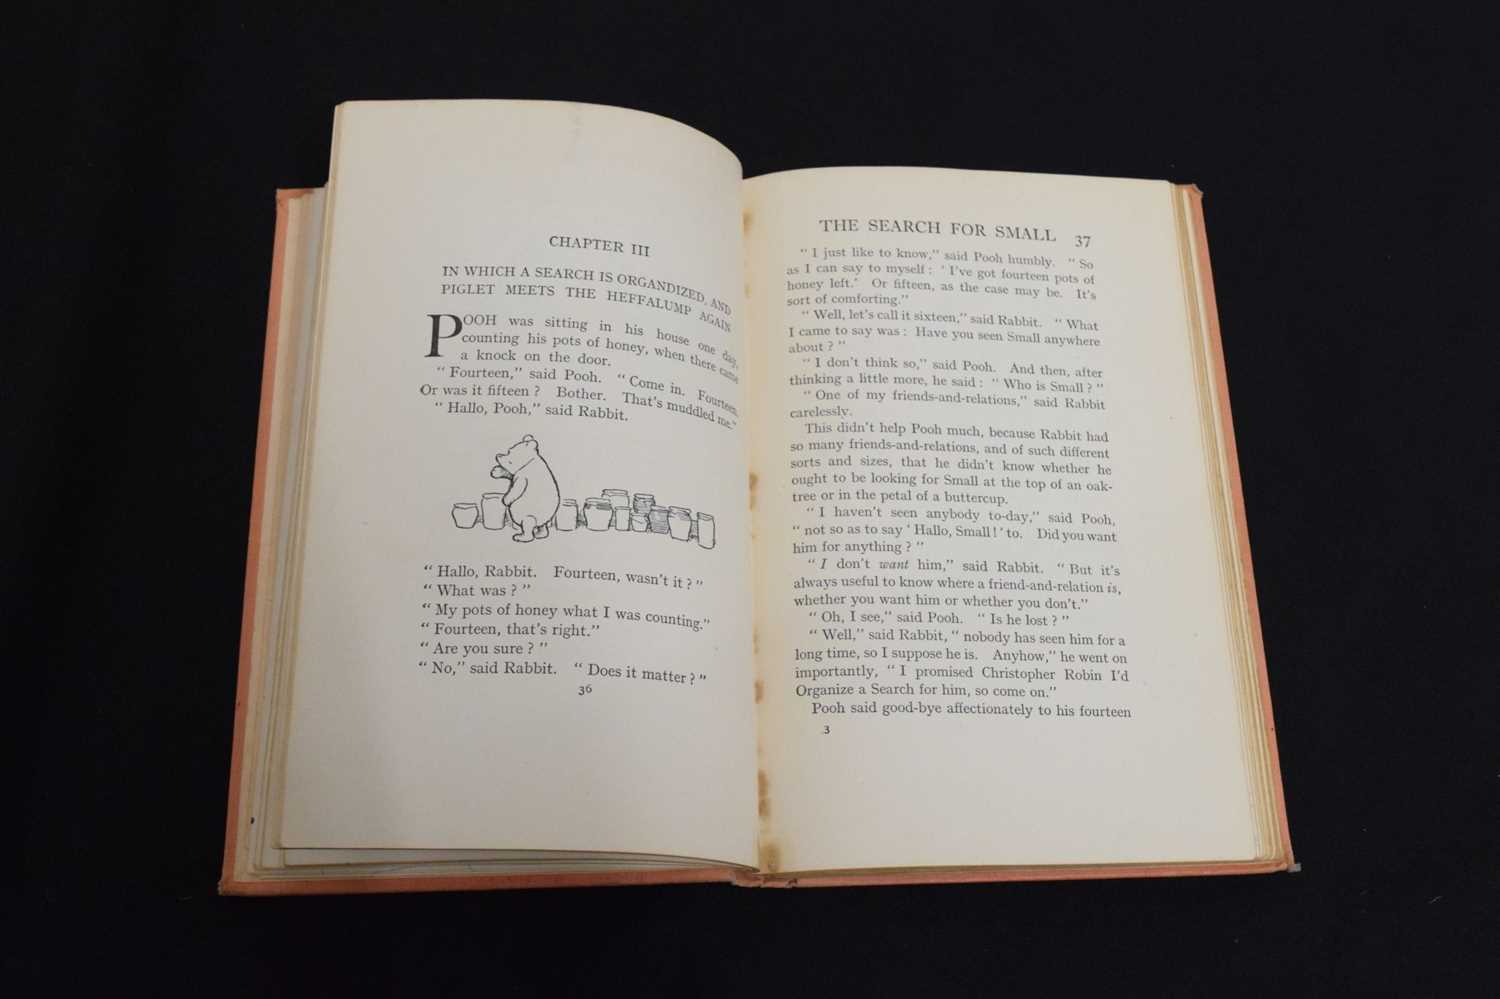 Milne A. A., 'The House at Pooh Corner' - First edition 1928 - Image 6 of 7